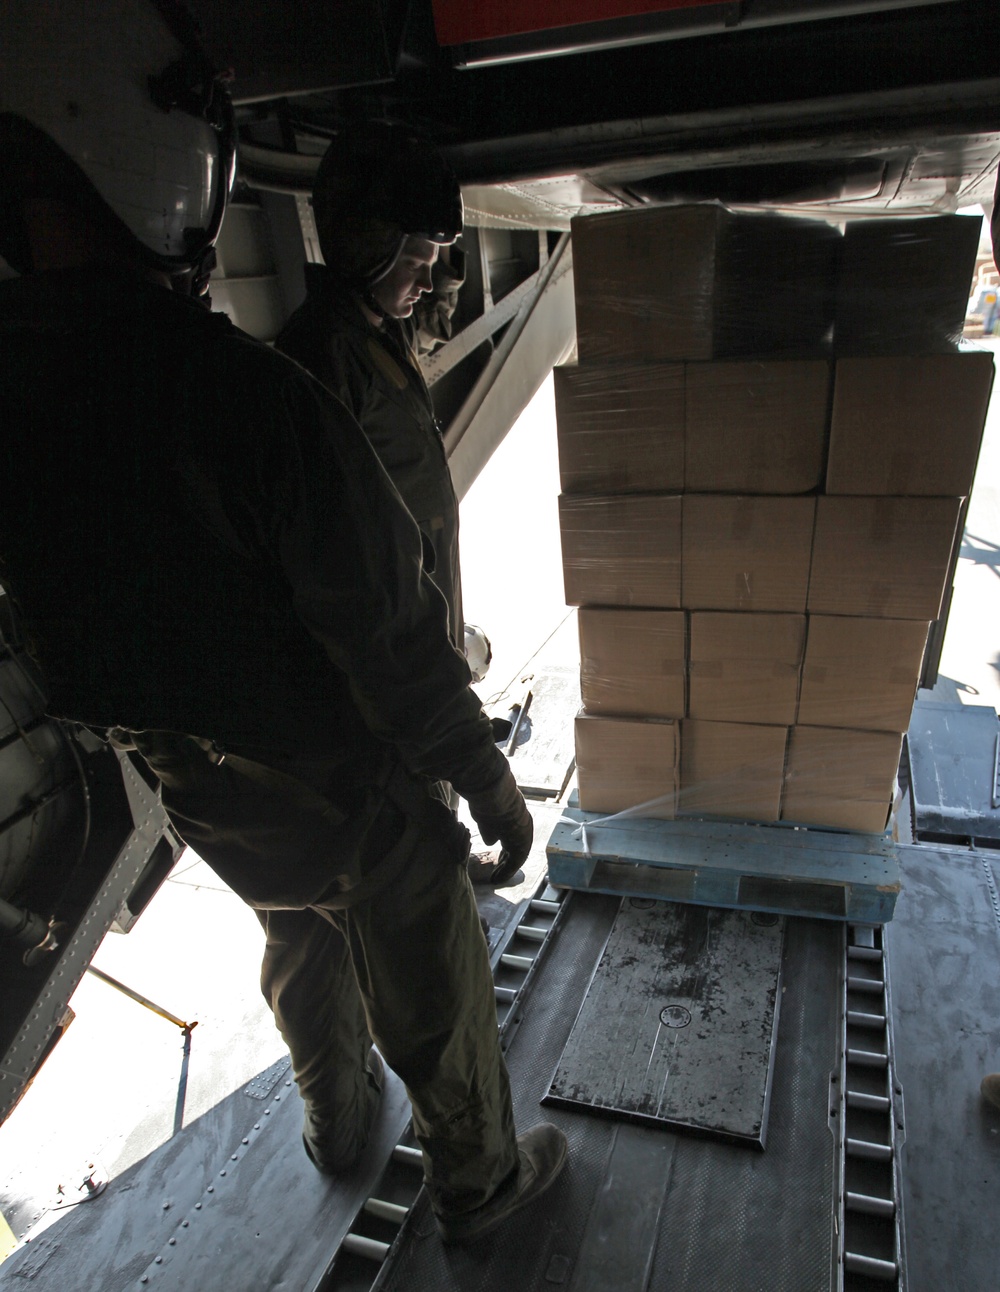 22nd Marine Expeditionary Unit, deliver ready-to-eat rations with a CH-53E Super Stallion